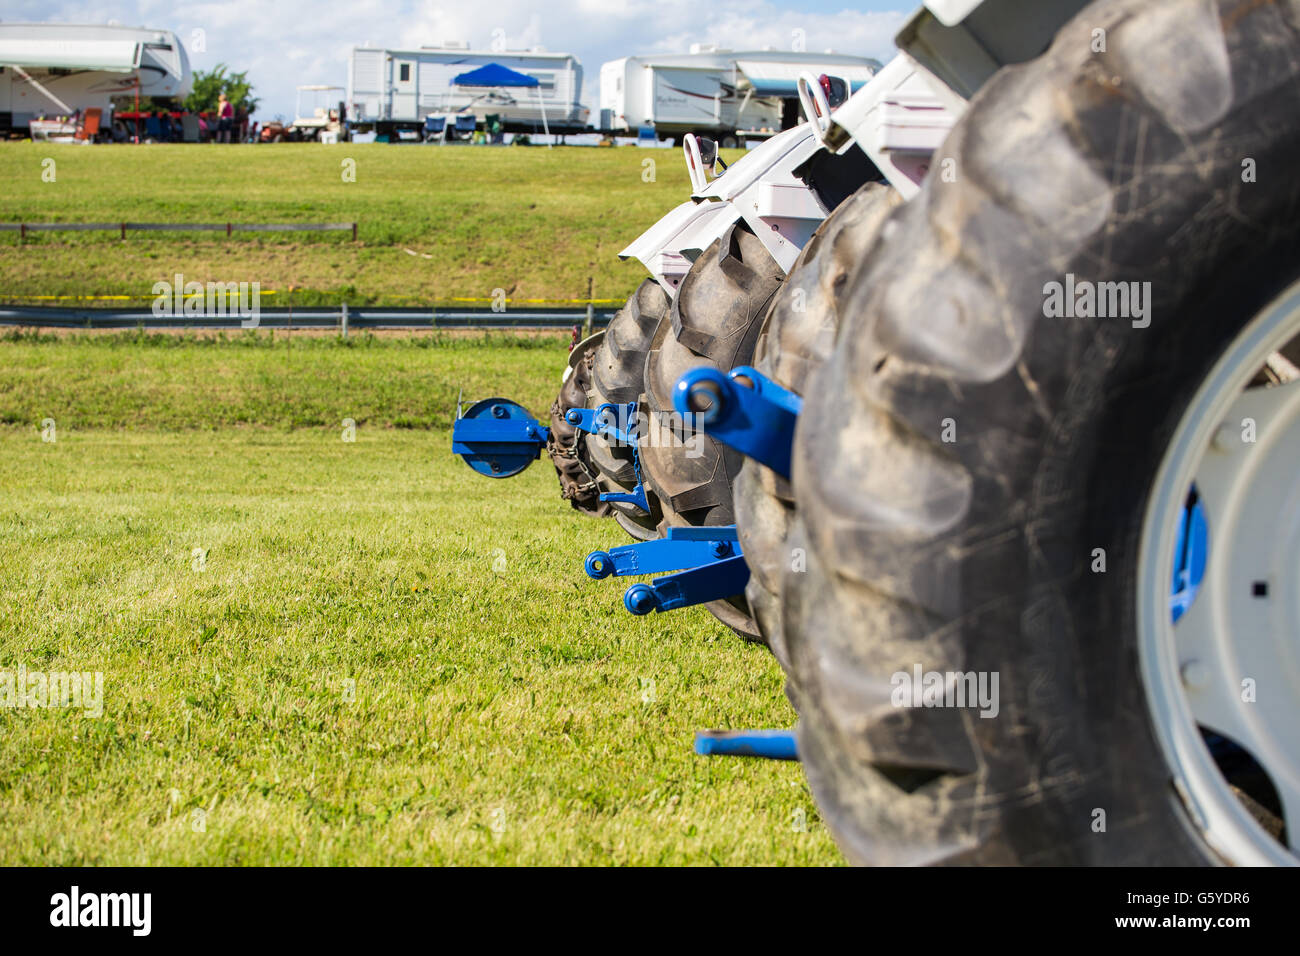 Tractors in perspective.  Antique/Classic farm tractors lined up at show Stock Photo